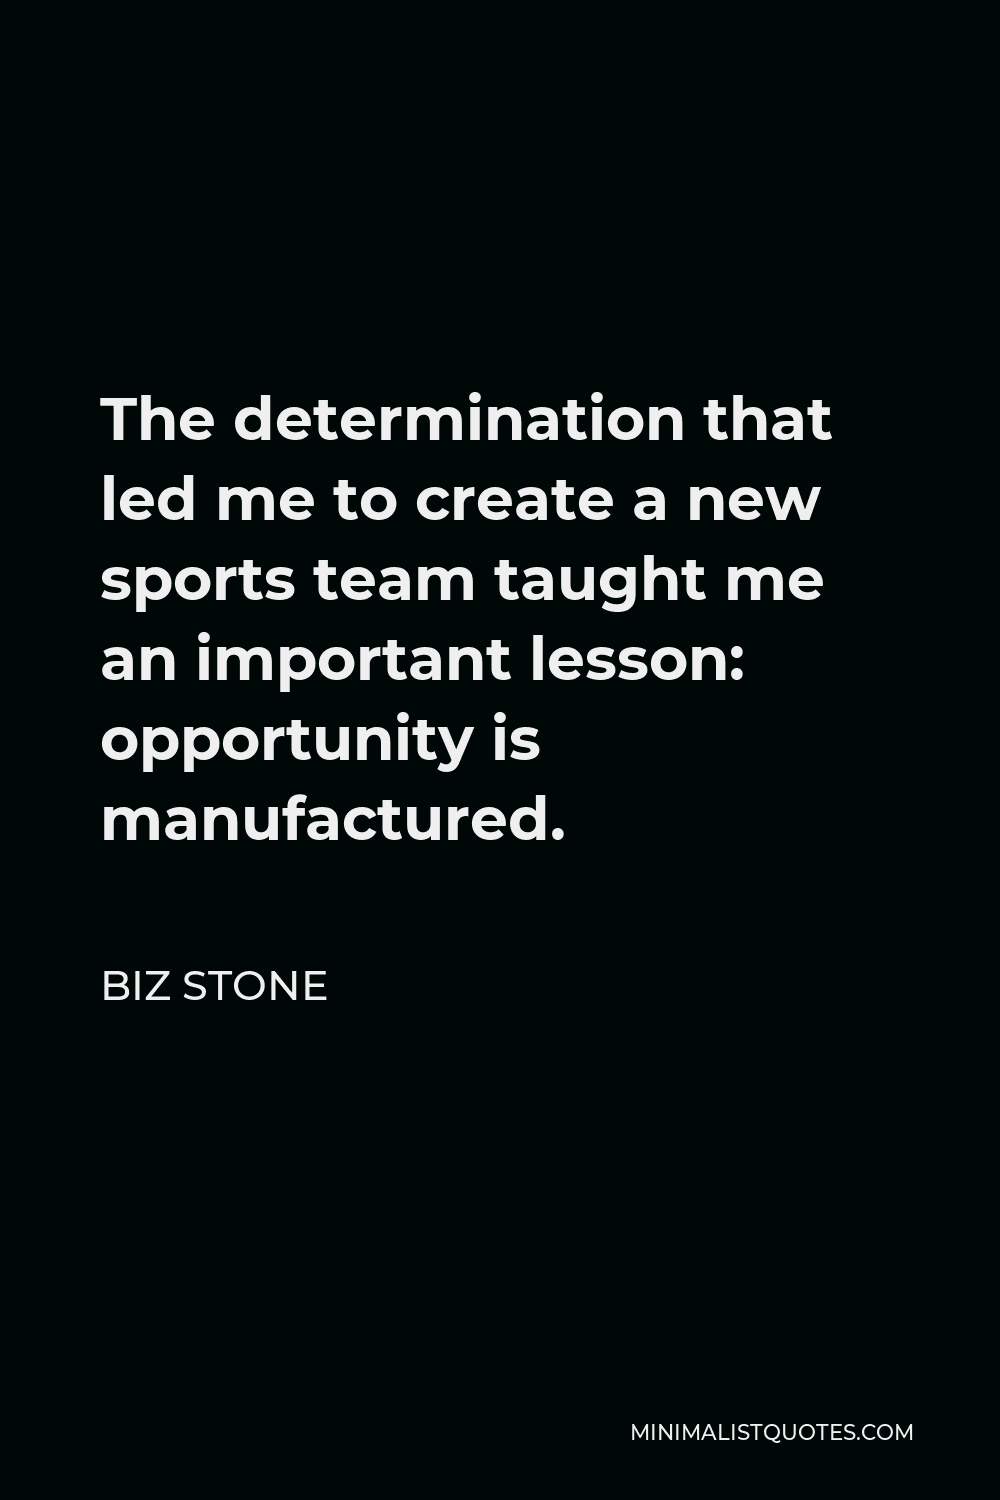 Biz Stone Quote - The determination that led me to create a new sports team taught me an important lesson: opportunity is manufactured.